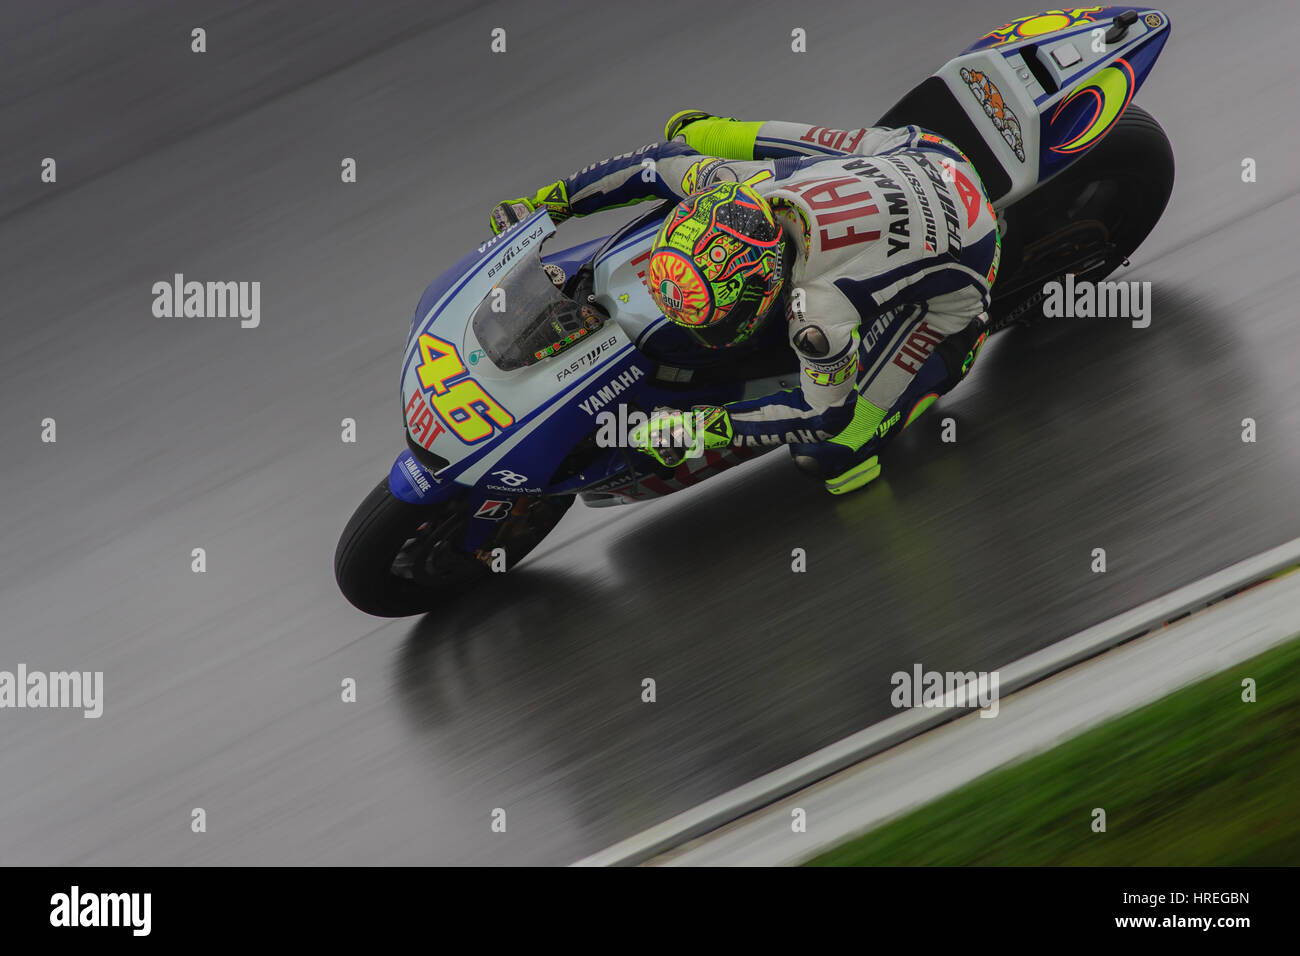 Valentino Rossi is a 9-time World Champion during the race in Sepang International Circuits. Stock Photo